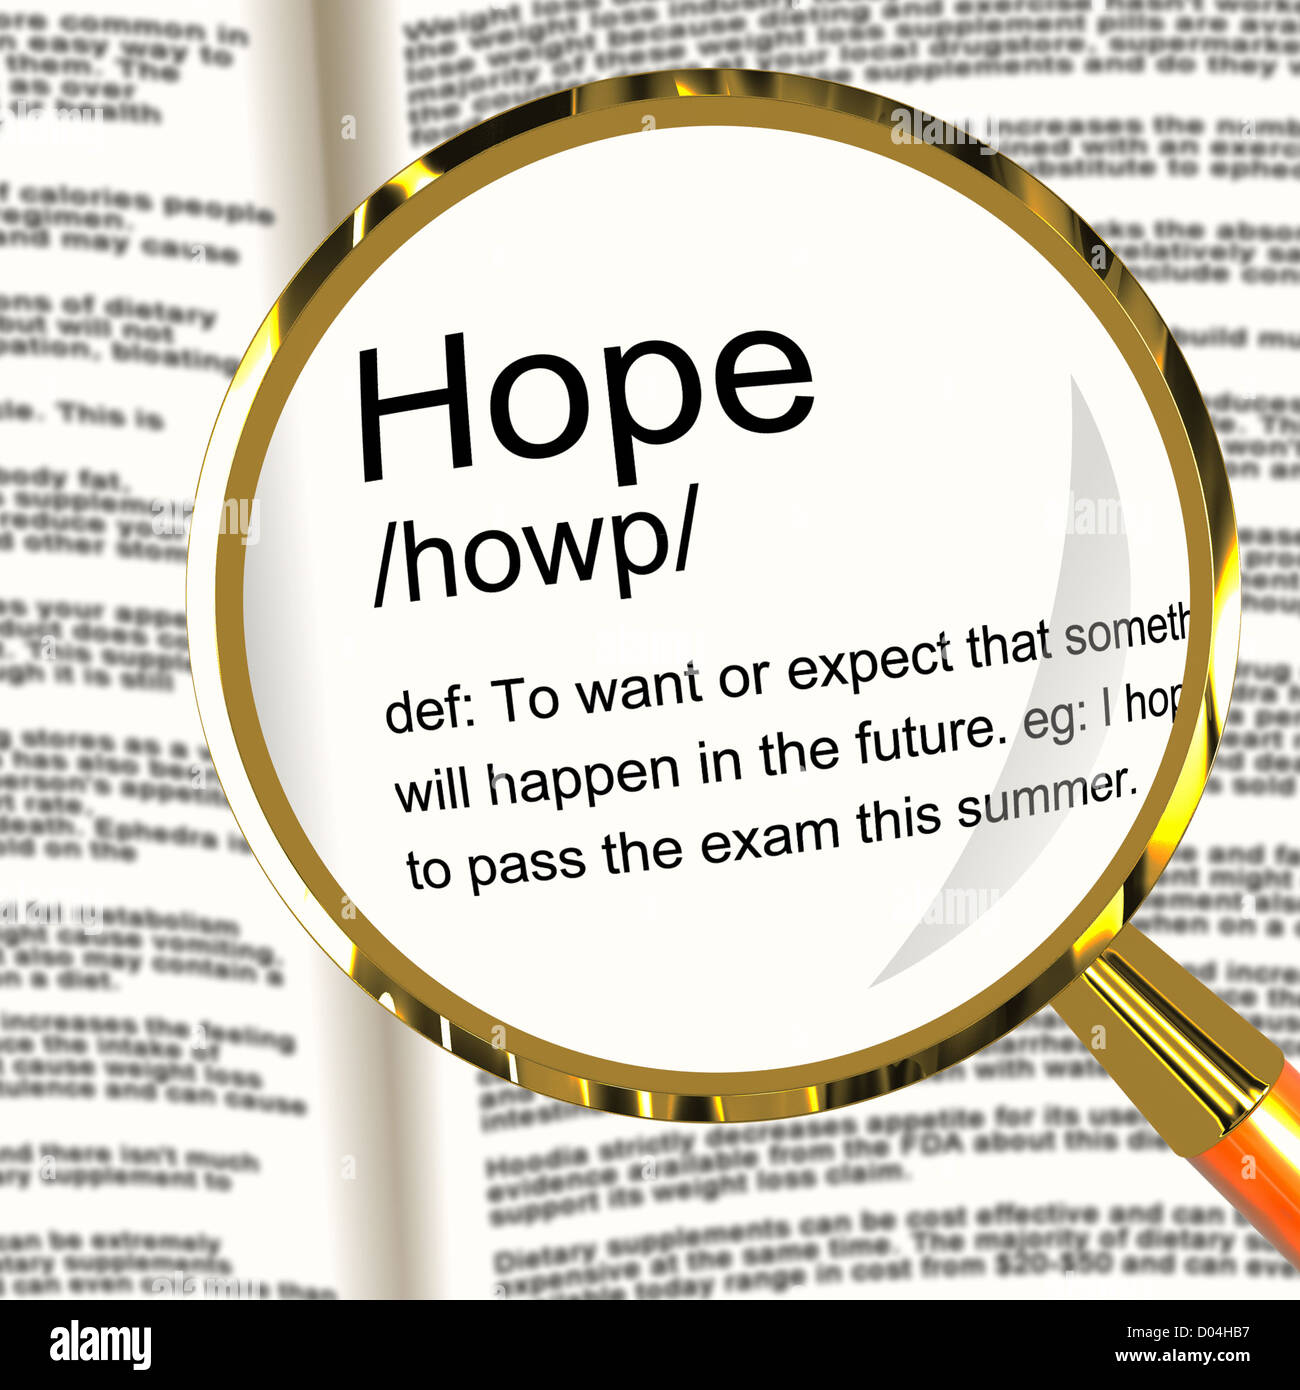 Hope Definition Magnifier Shows Wishes Wants And Hopes Stock Photo